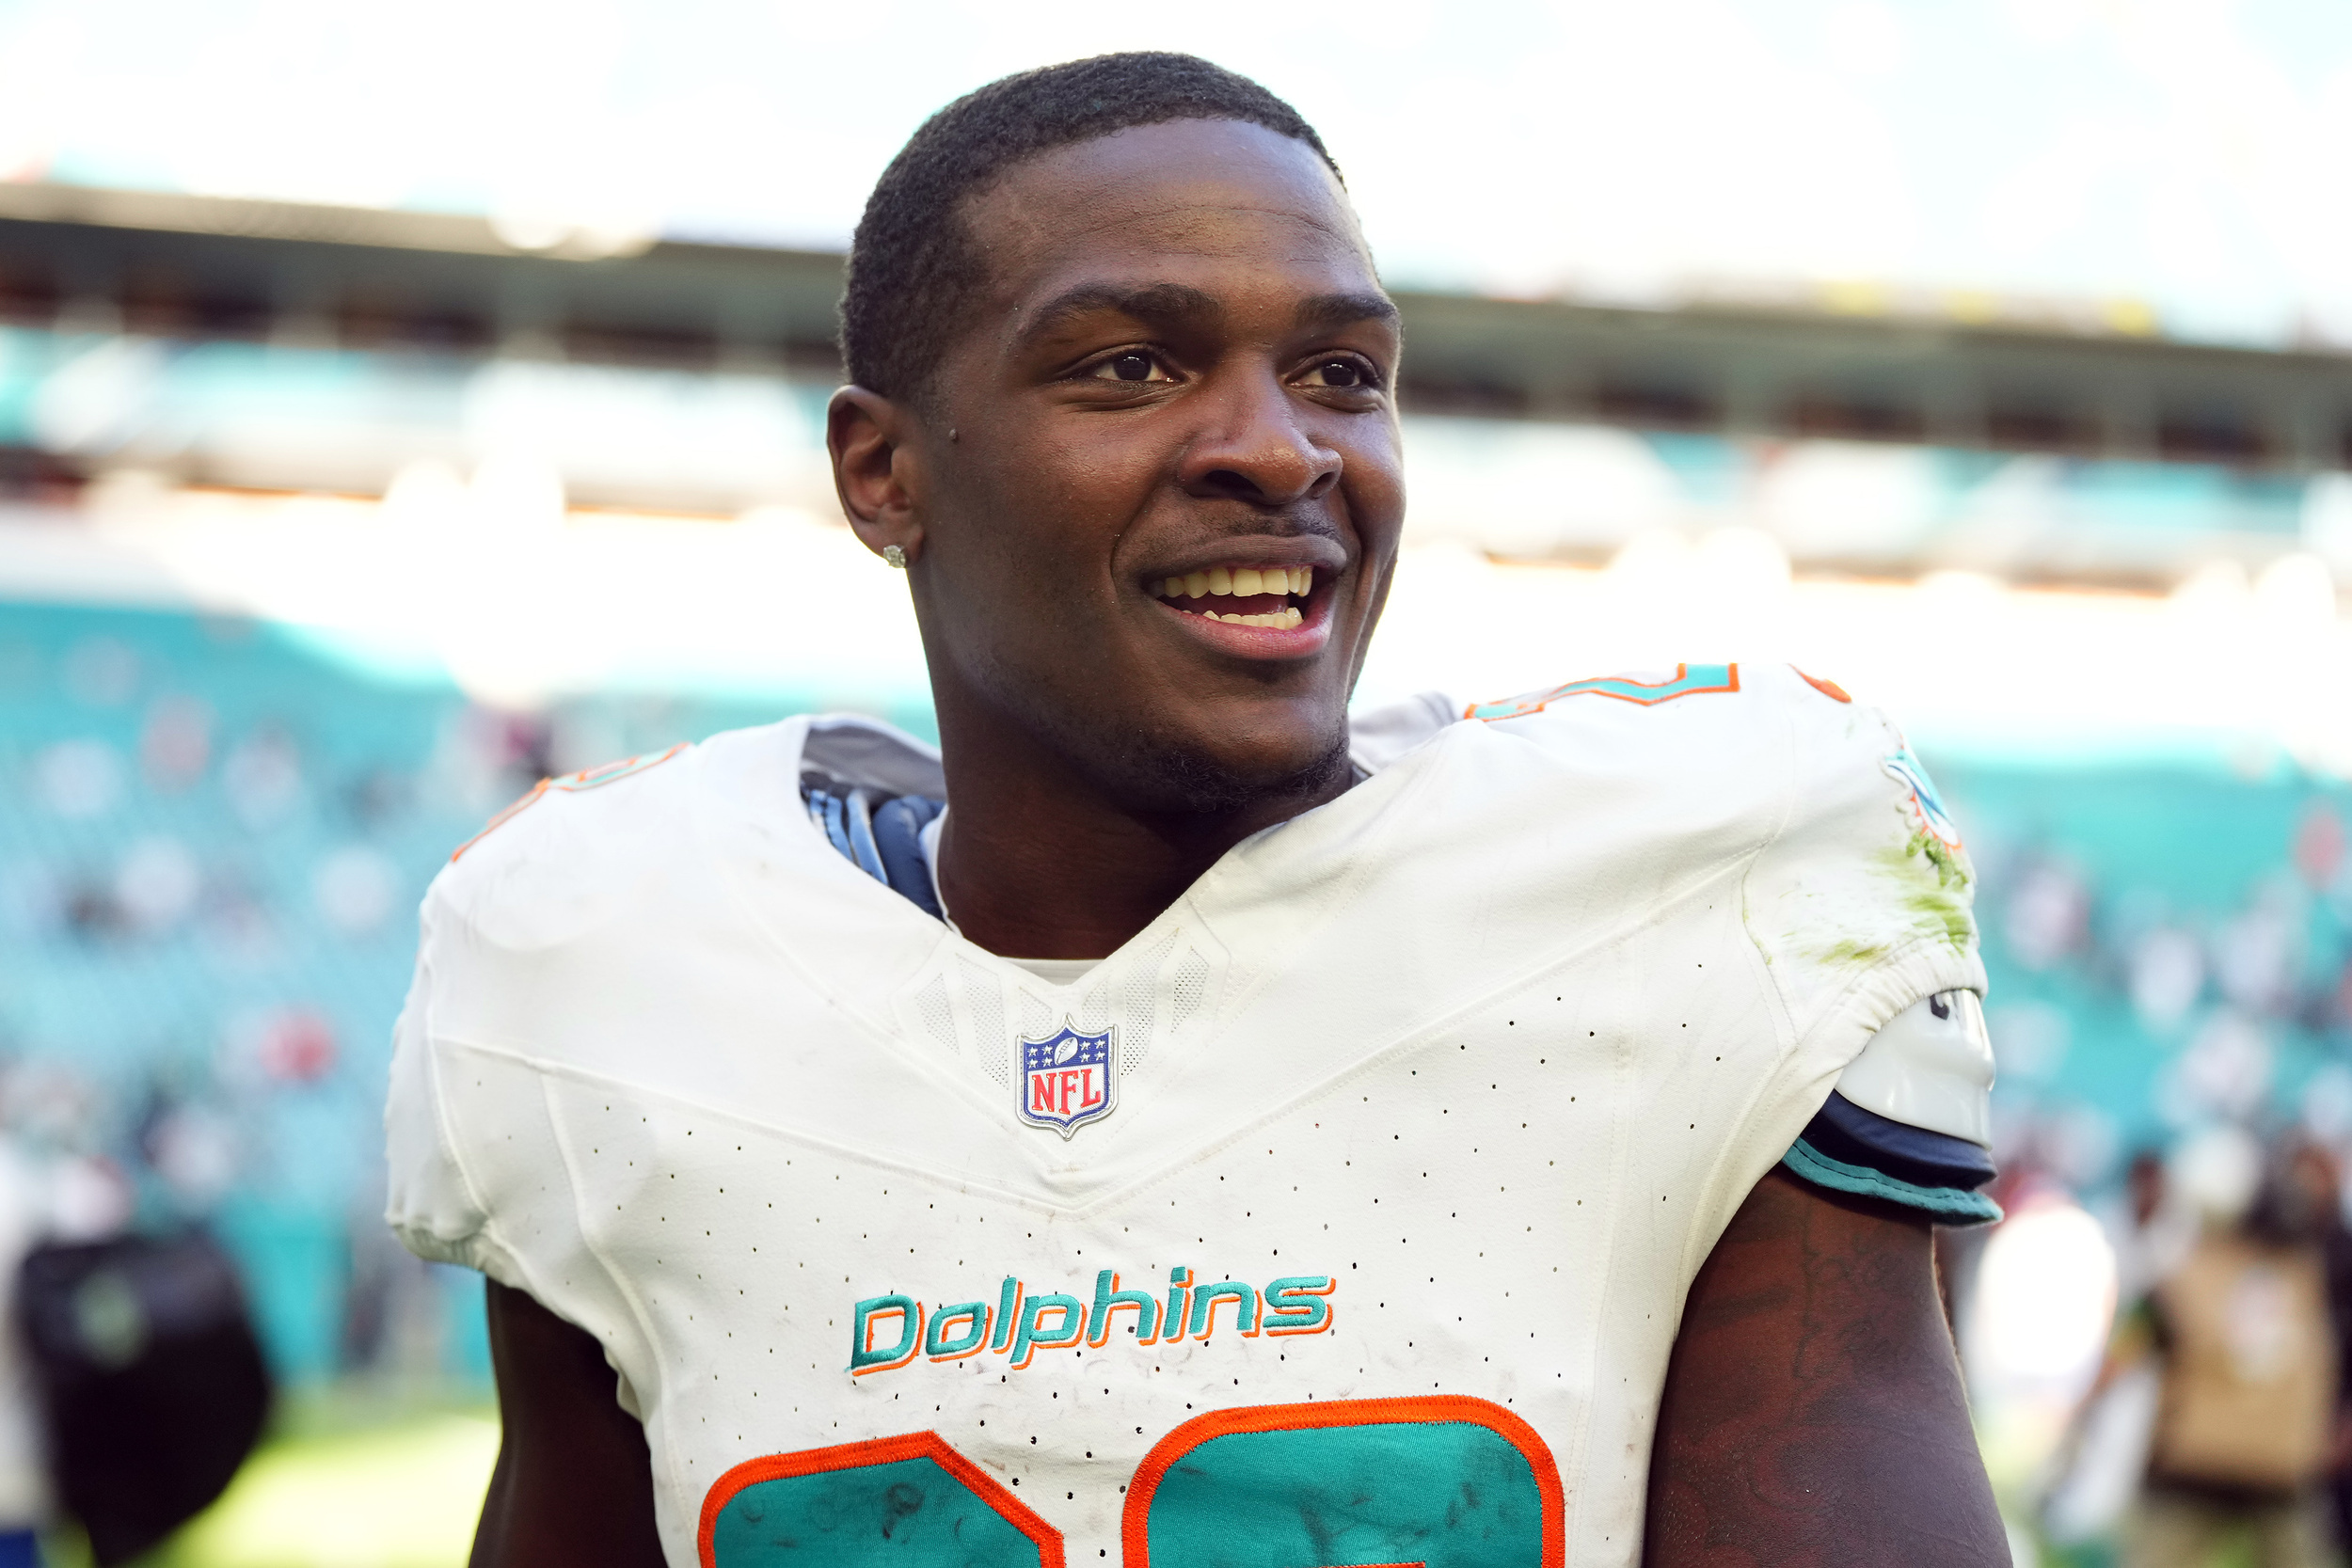 dolphins rookie reaches historic feat in regular season finale